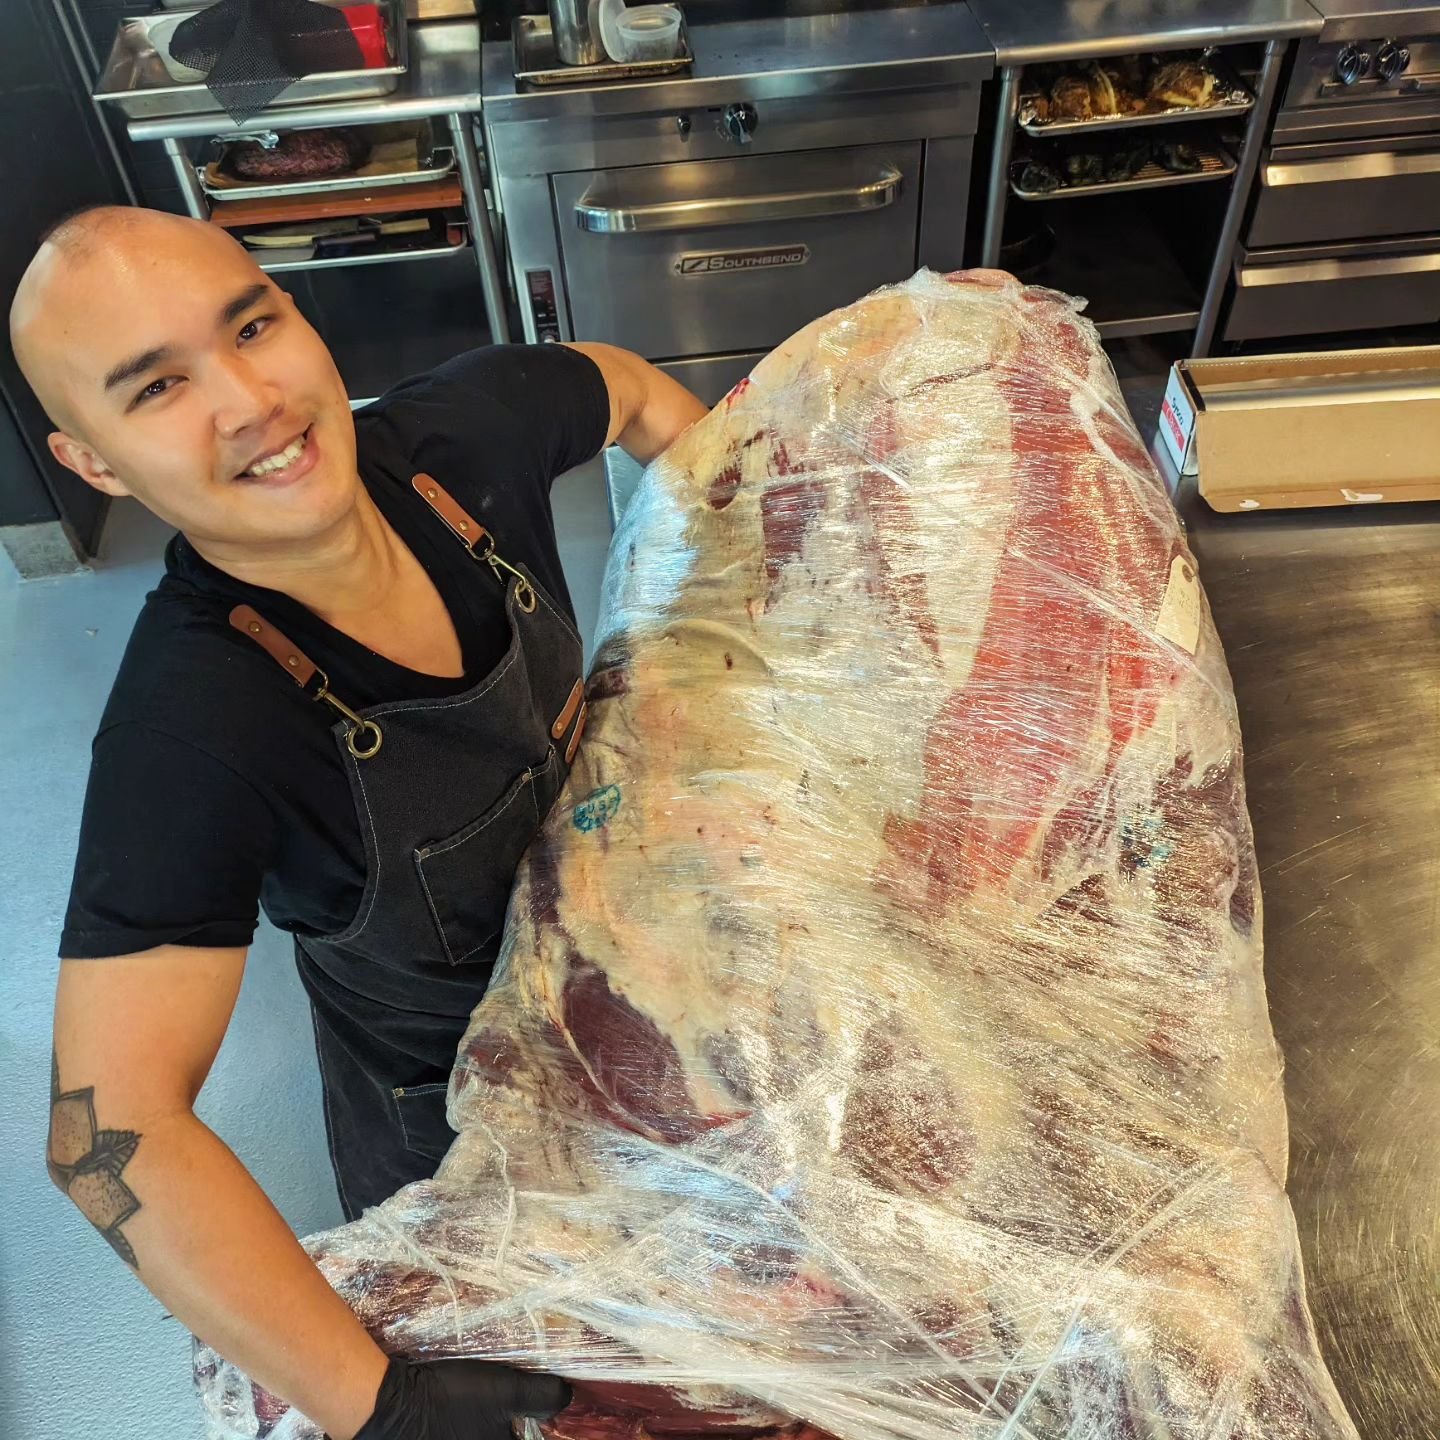 Caught a big one! 
Whole animal butchery is a sizeable endeavor, but it allows us to put meat on the menu in a more responsible way. ... And to hold feats of strength contests in the kitchen. 
.
.
.
#arlorestaurant #beef #wholeanimalbutchery #butcher